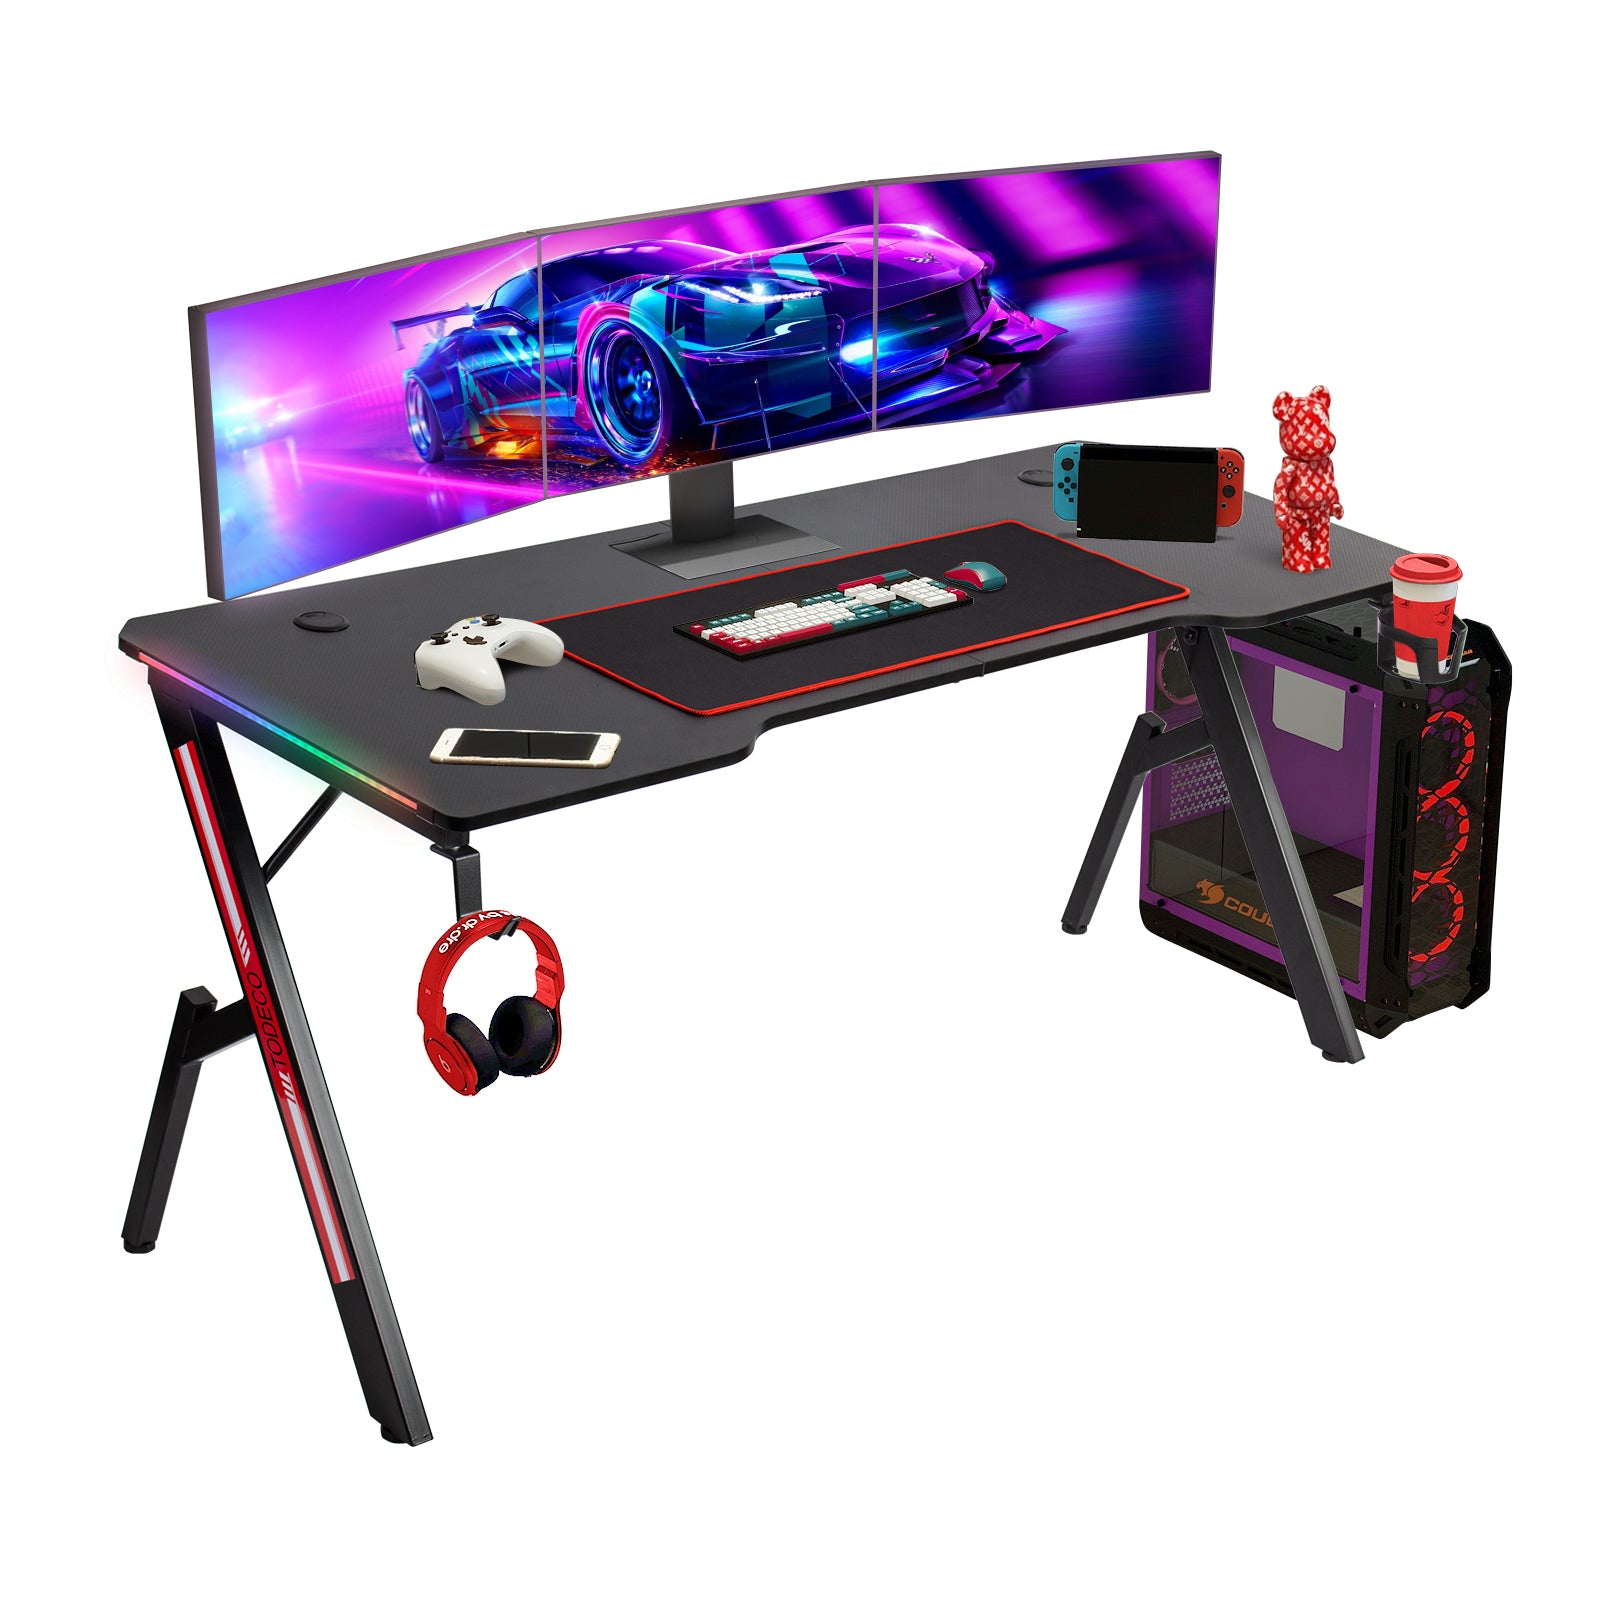 Todeco-LED-Gaming-Desk-160-x-60cm-Large-Gaming-Desk-with-Carbon-Fiber-Top-Ergonomic-Desk-with-Mouse-Pad-Cup-Holder-and-Headphone-Hook